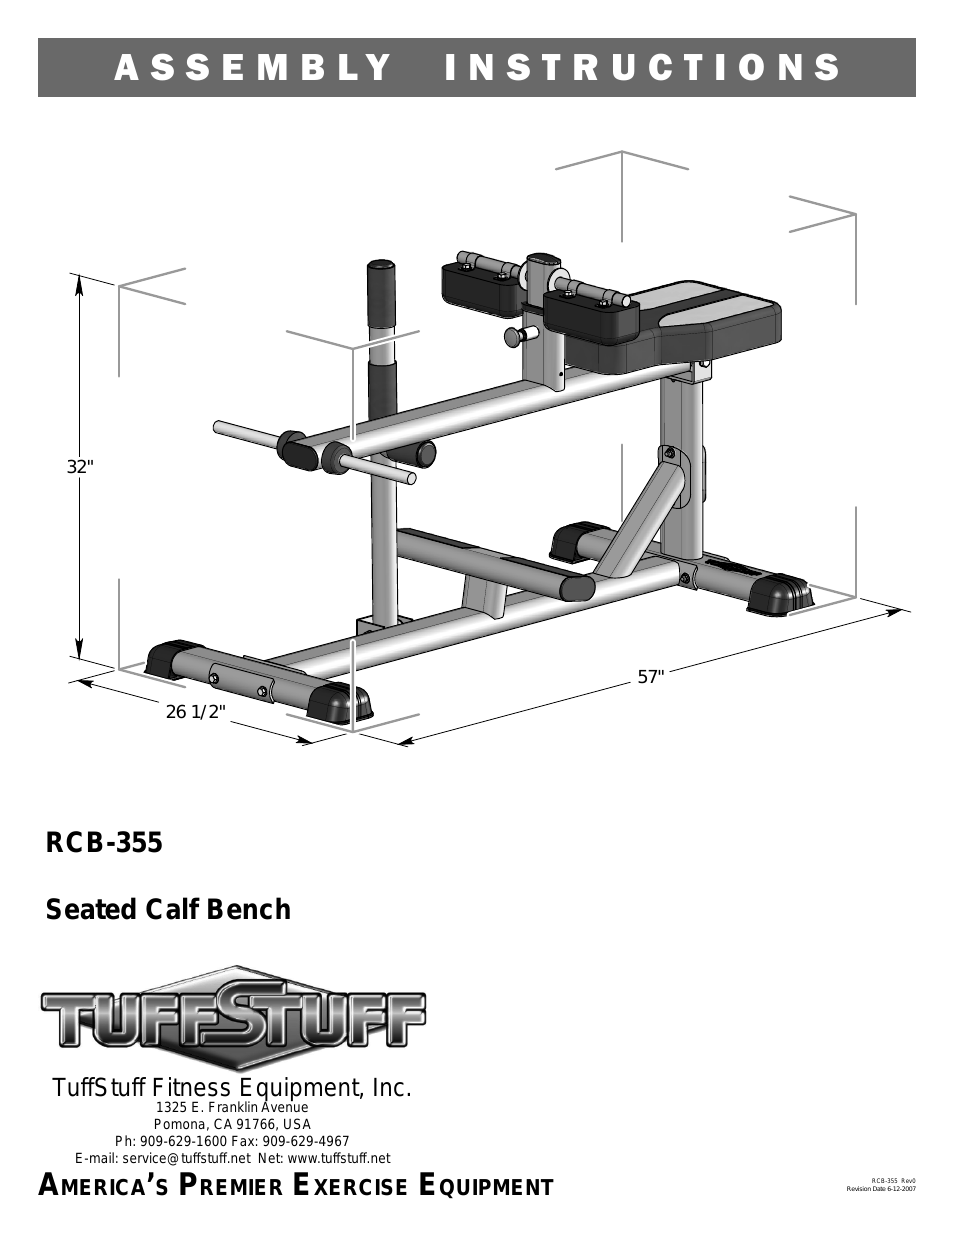 RCB-355 Seated Calf Bench